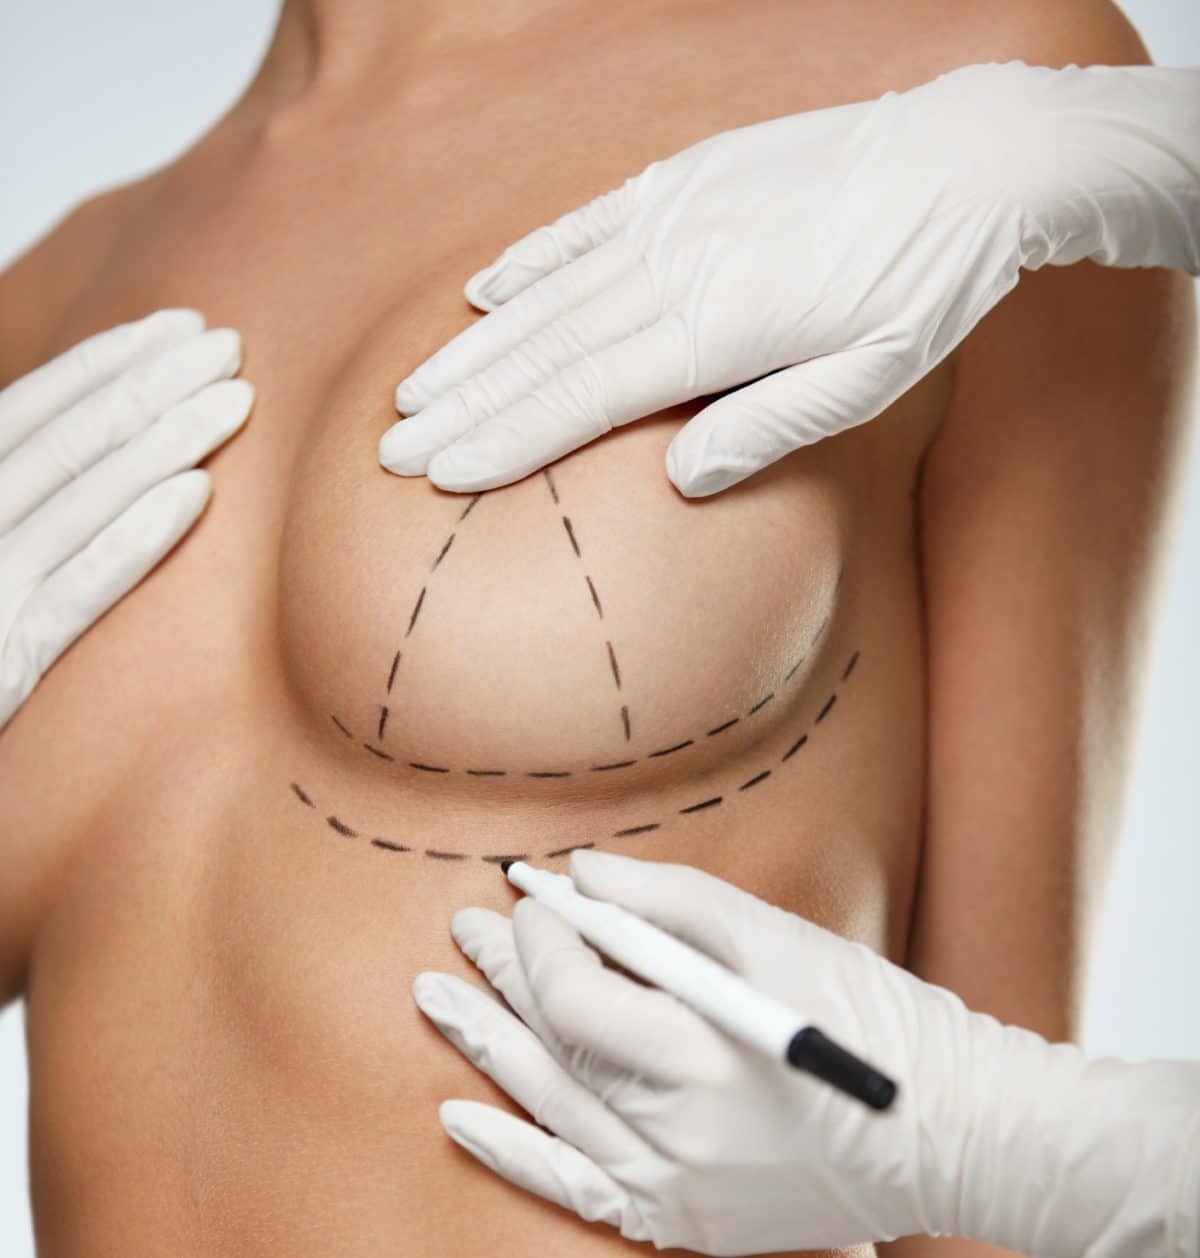 Breast Reduction Surgery Near Me - Breast Reduction Surgeons Near Me